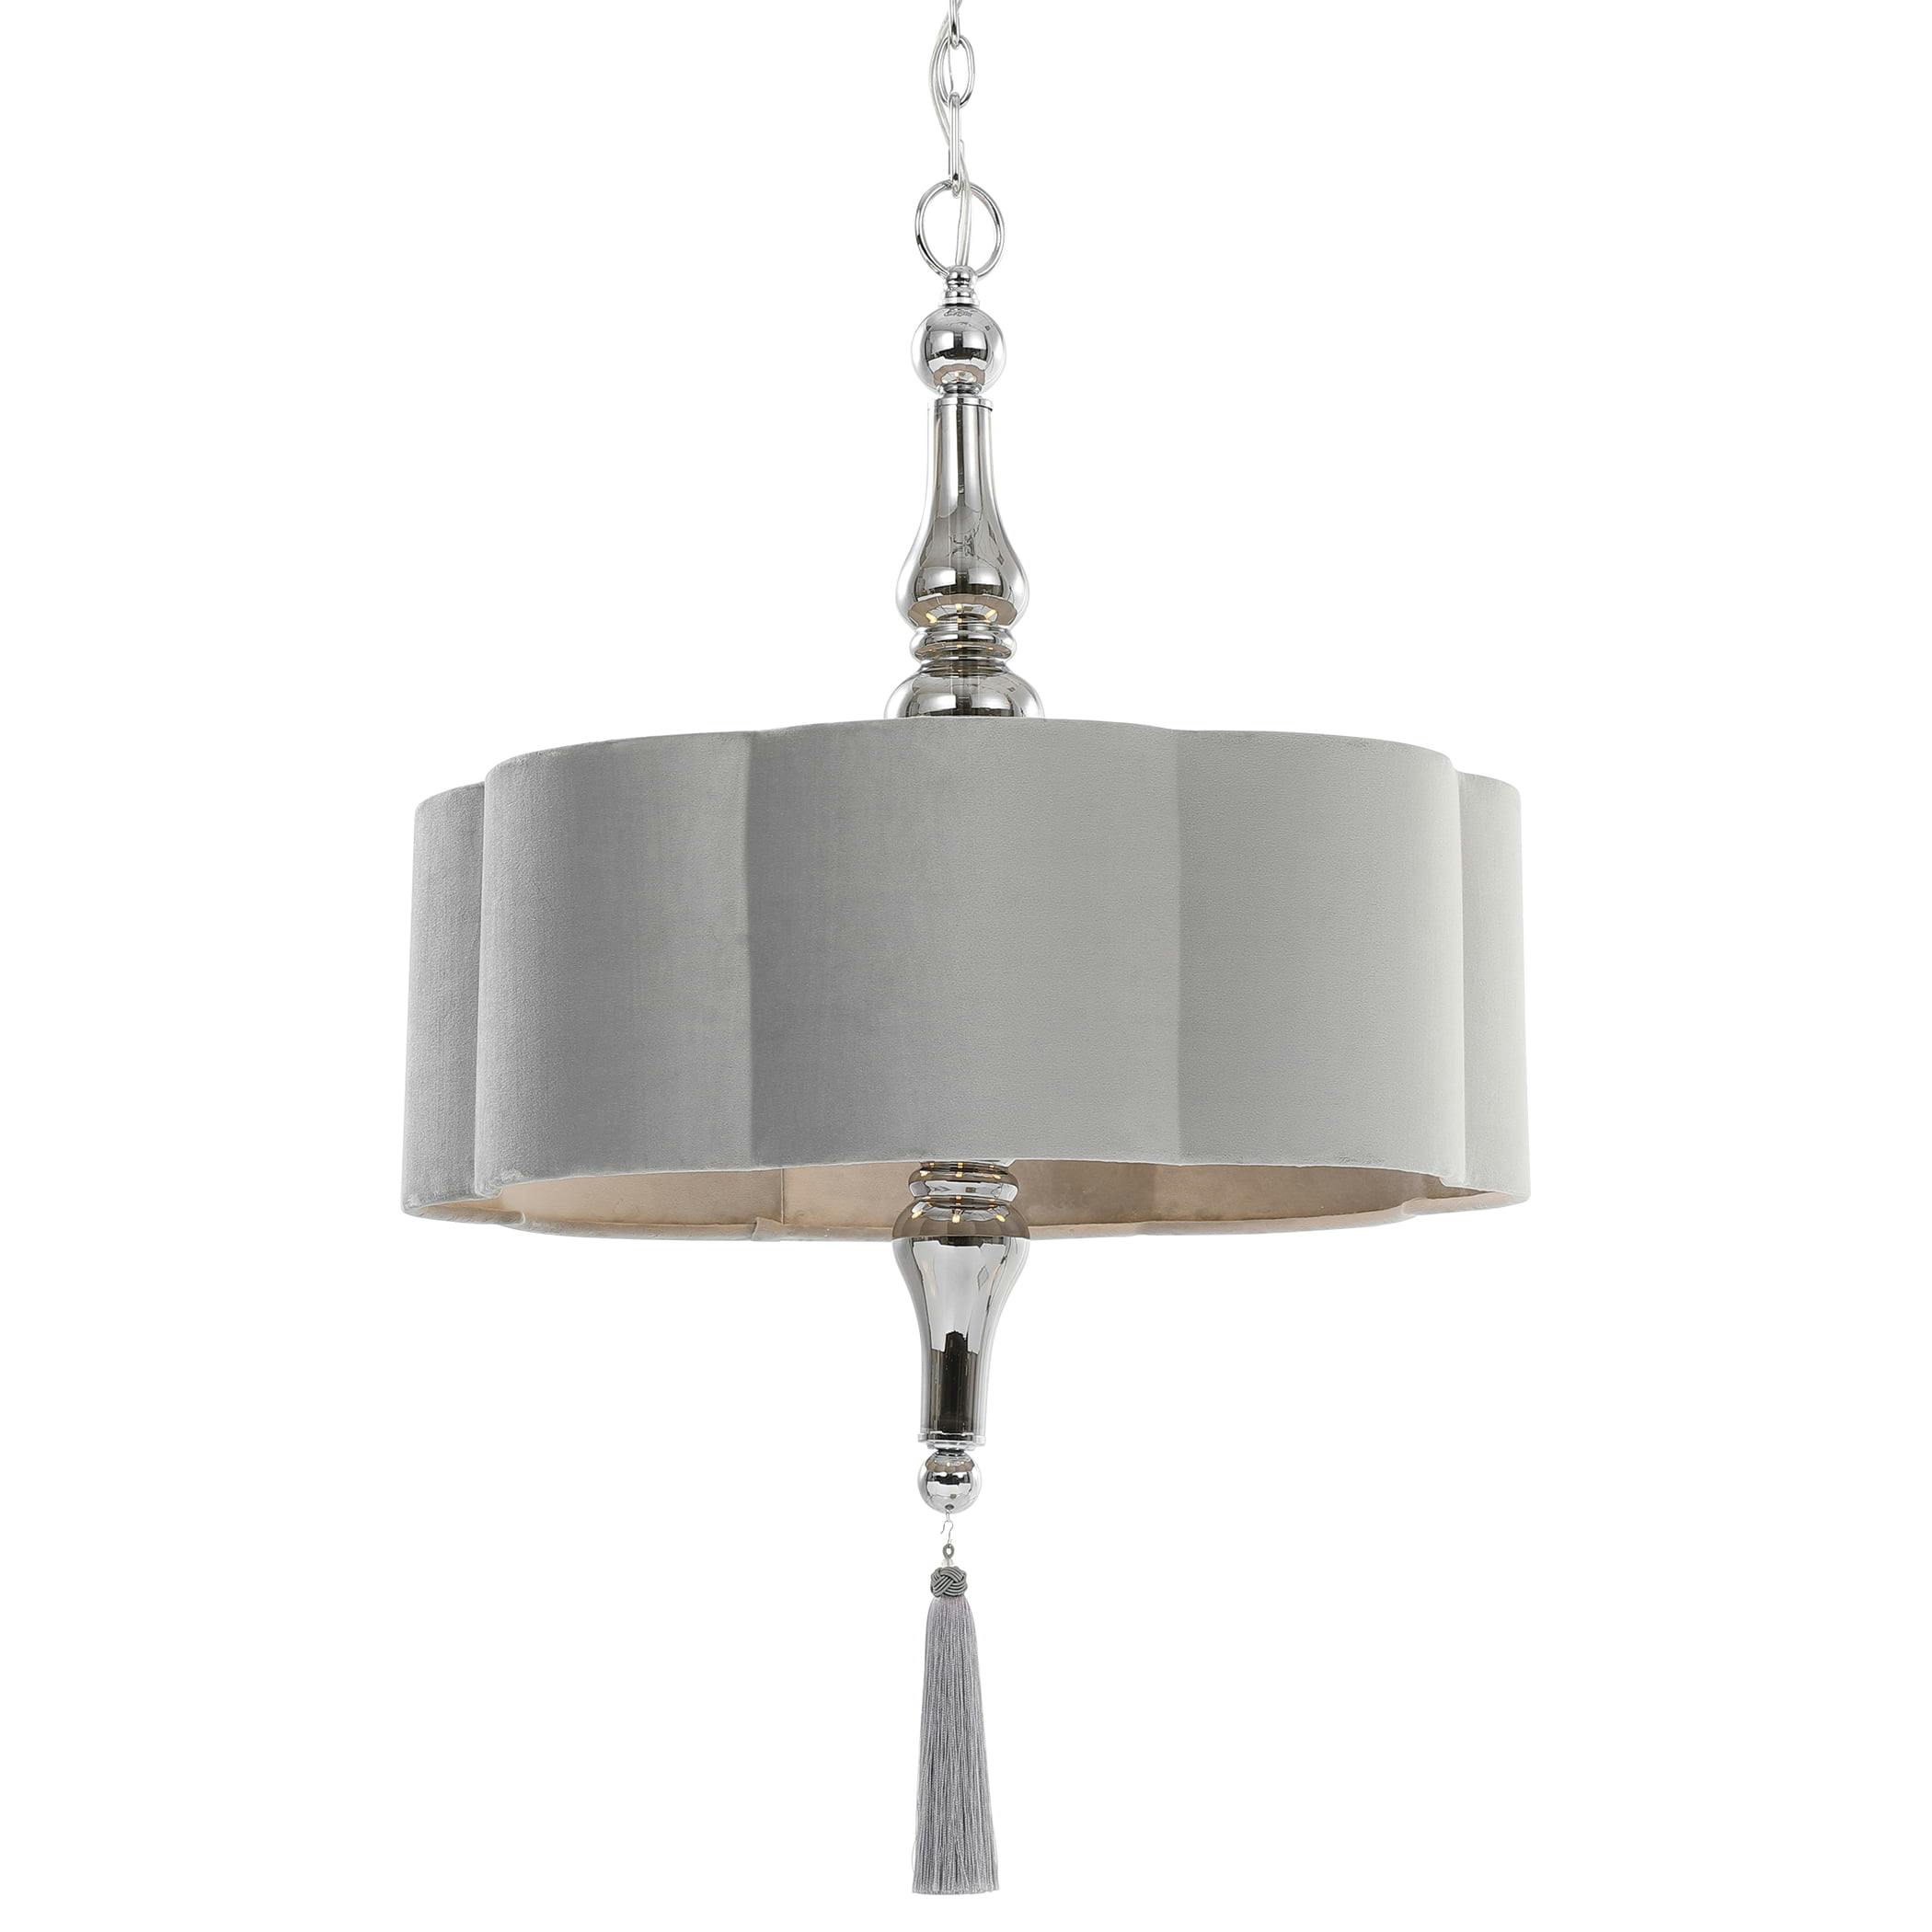 Helena Chrome Finish 4-Light Drum Pendant with Smoke Glass Accents